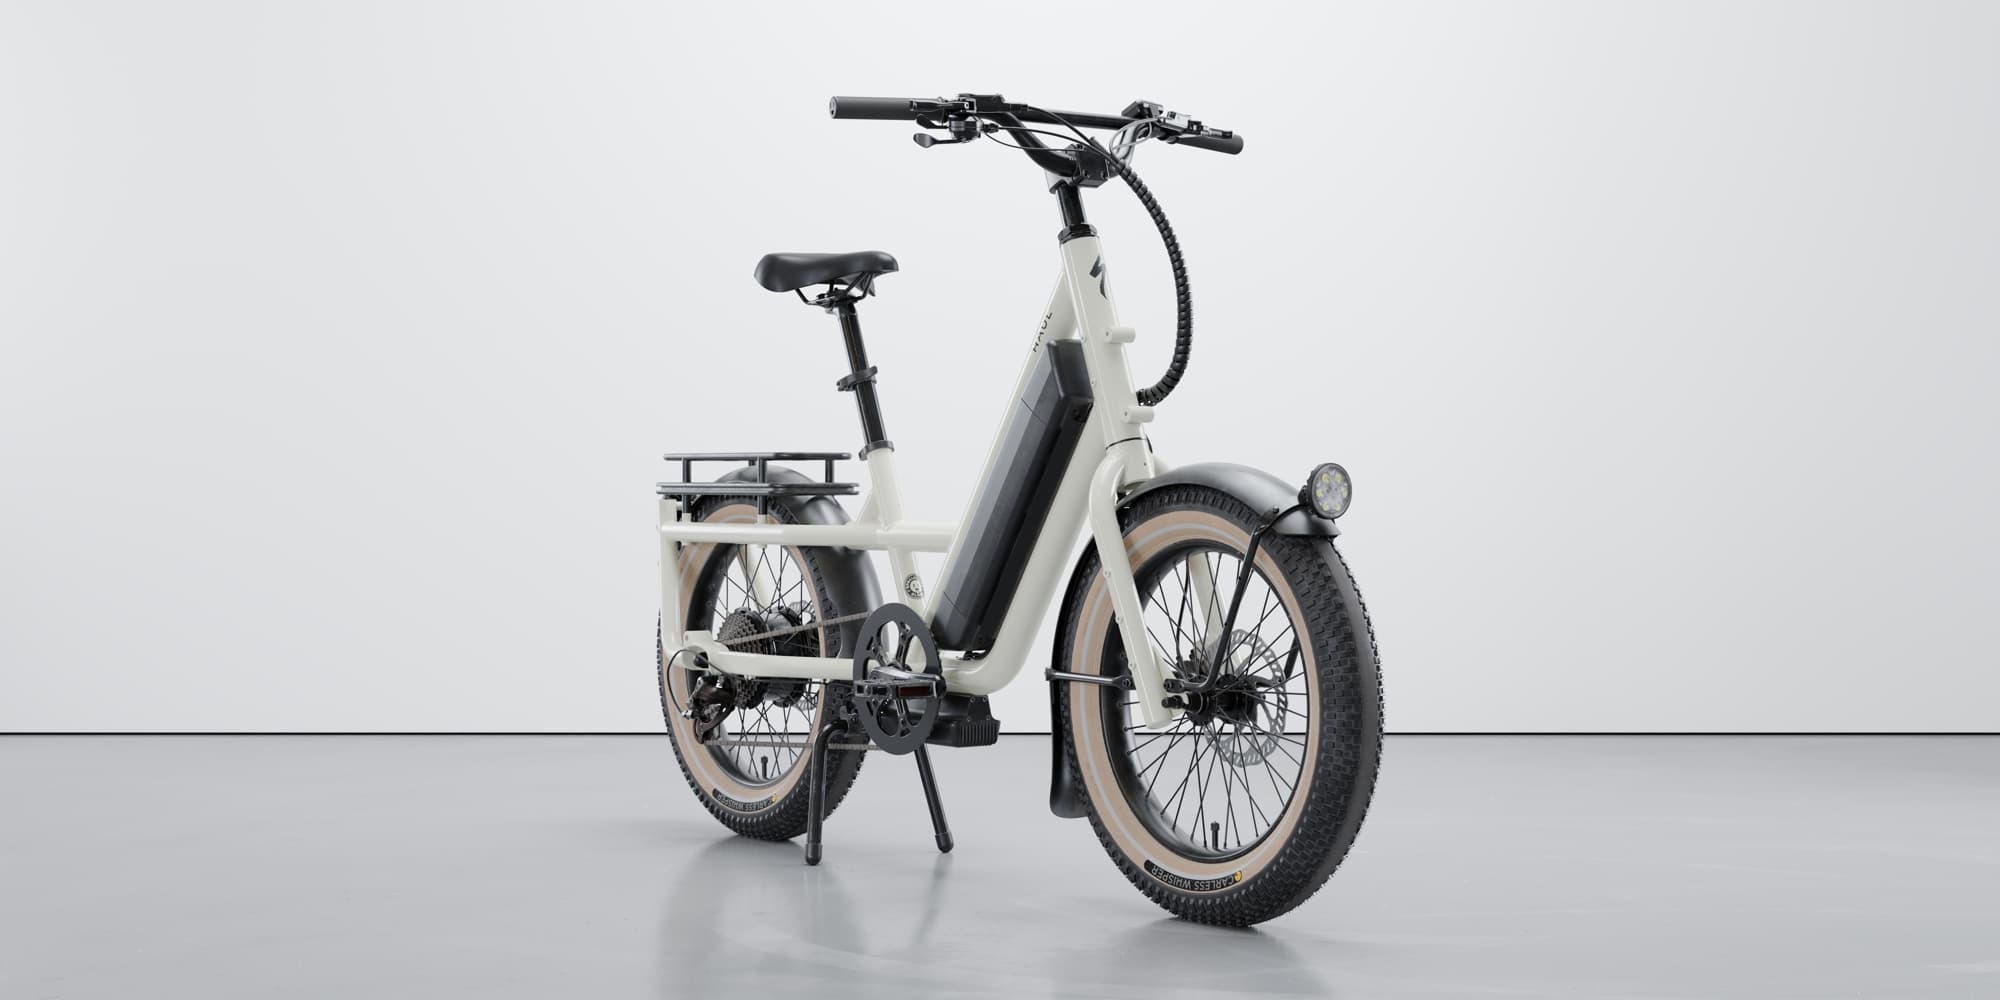 Specialized Globe Haul ST launched as brands first low-cost e-bike